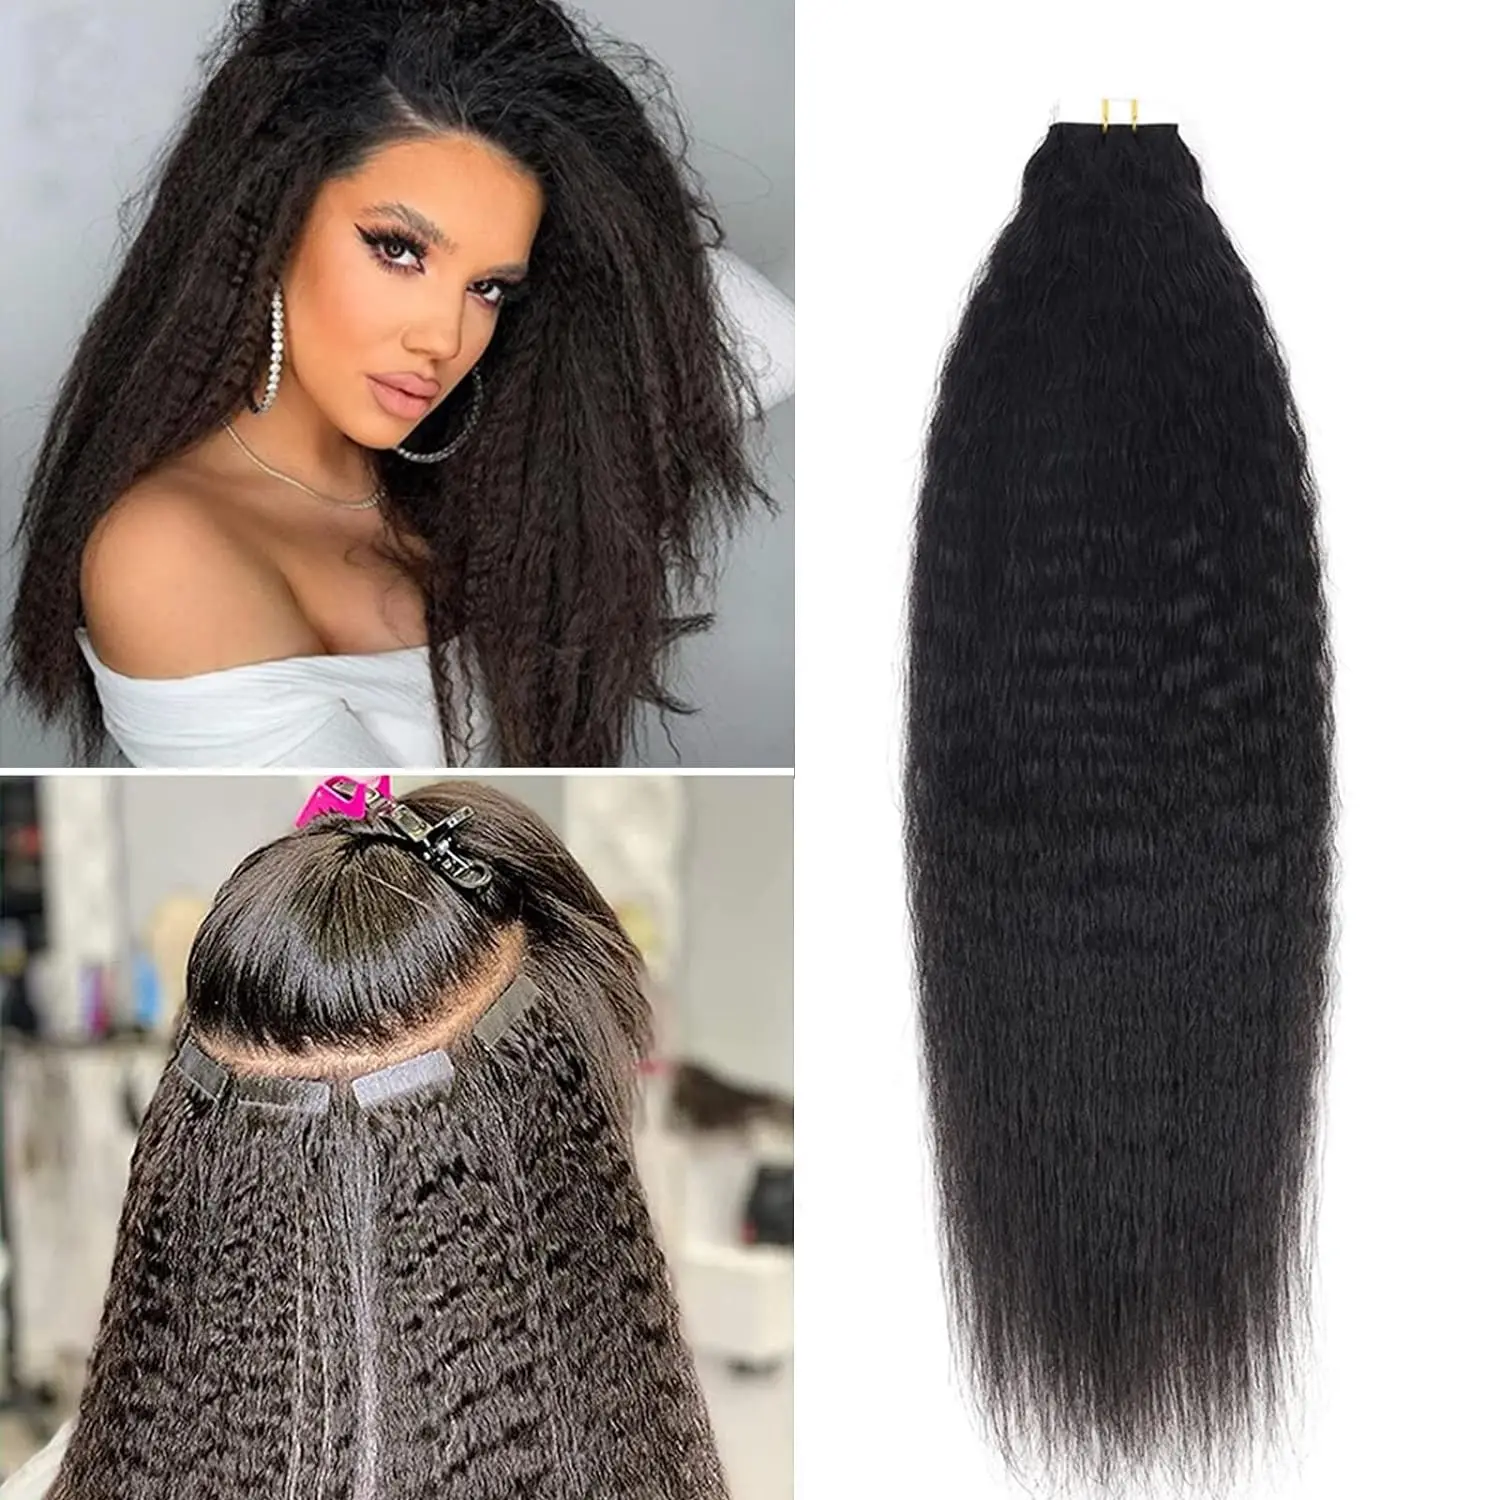 

26 Inch Kinky Straight Tape In Human Hair Extensions Skin Weft Hair Extensions Adhesive Invisible Brazilian Virgin Natural Hair